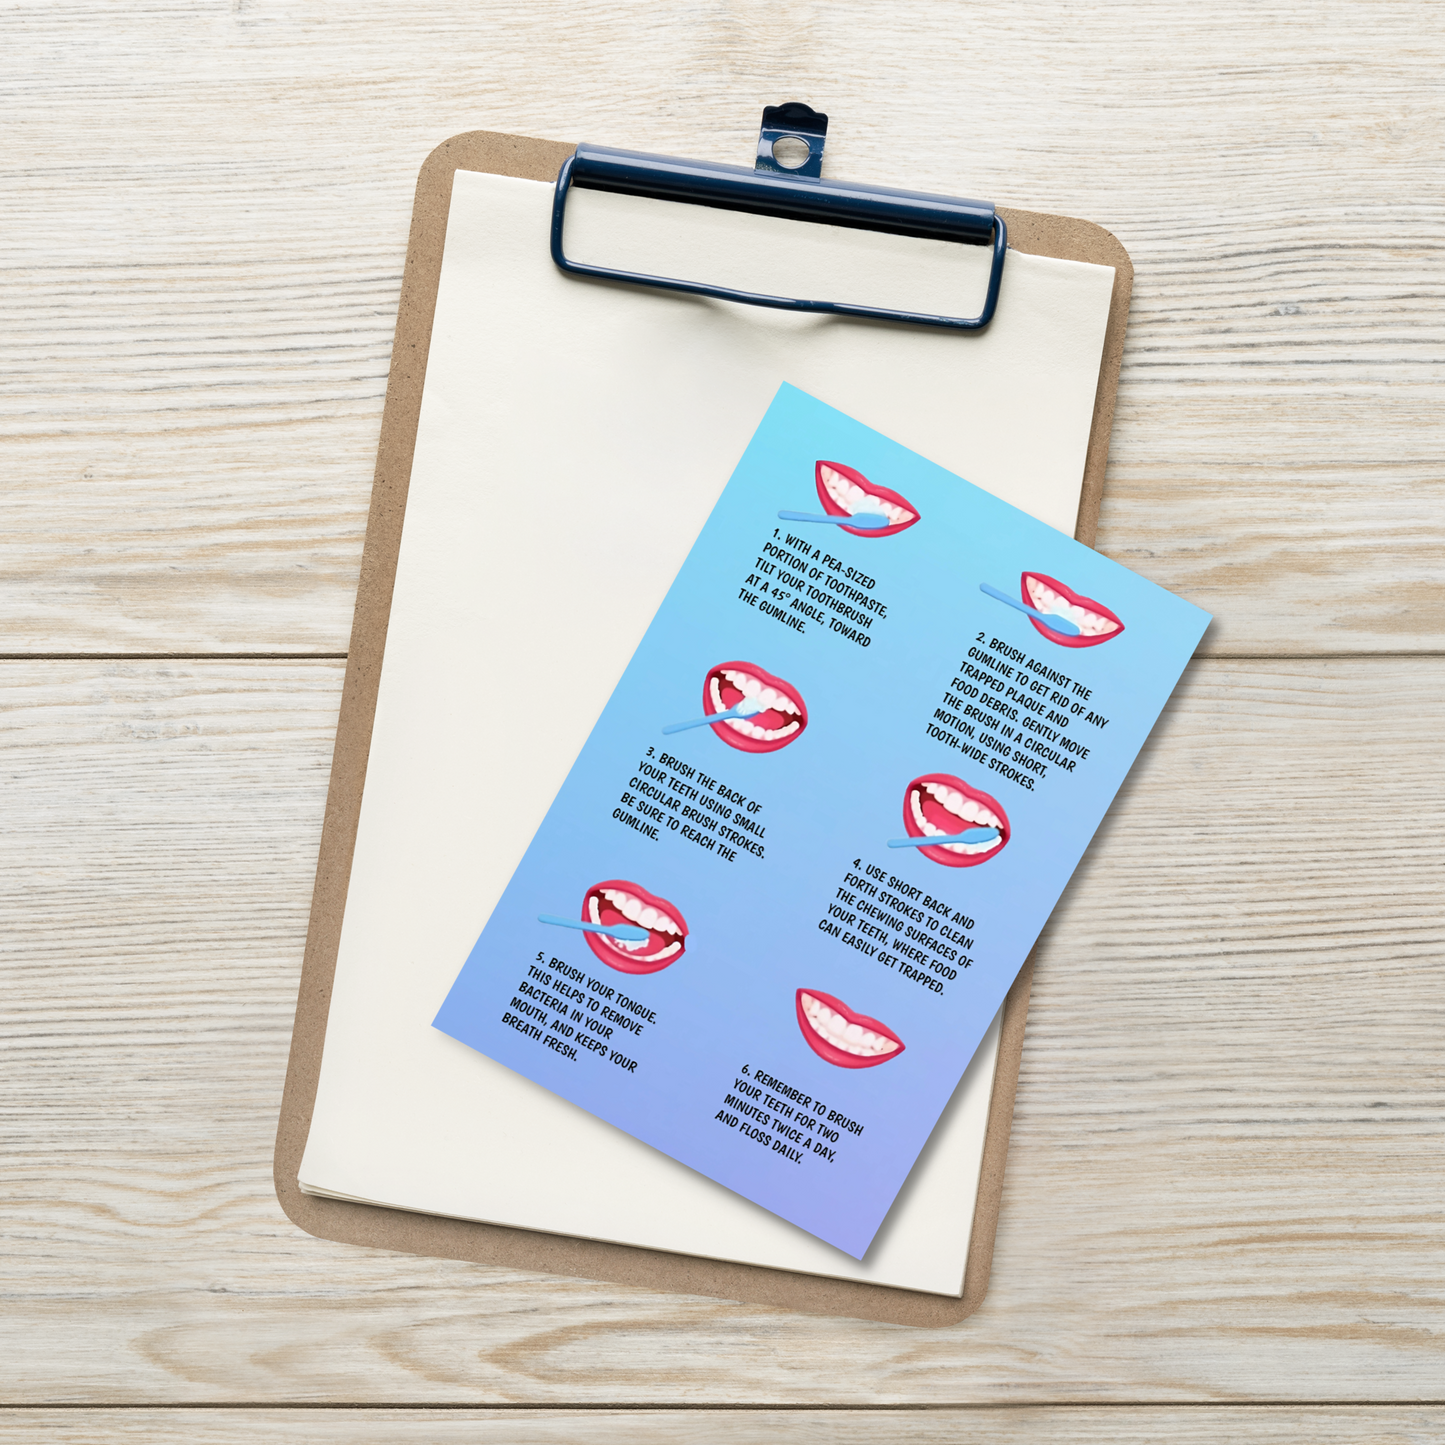 Oral Hygiene Cards-  Steps For How To Brush Your Teeth (With illustrations)